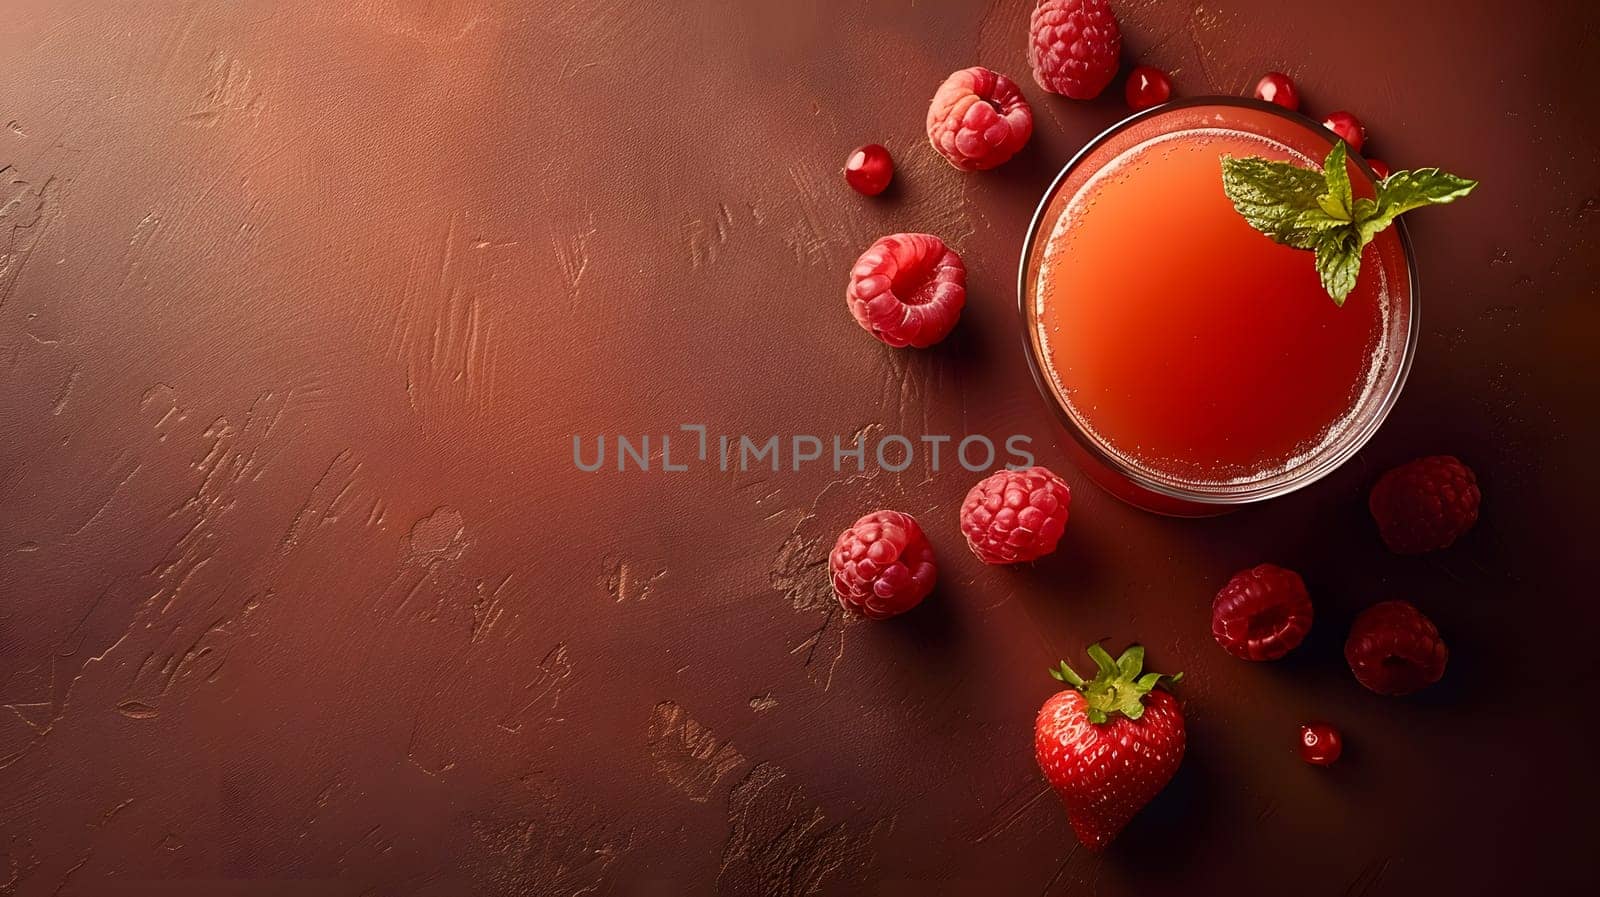 A glass of fruit juice, made from seedless fruits like raspberries and strawberries, sits on a table surrounded by a natural display of berries and cherry twigs